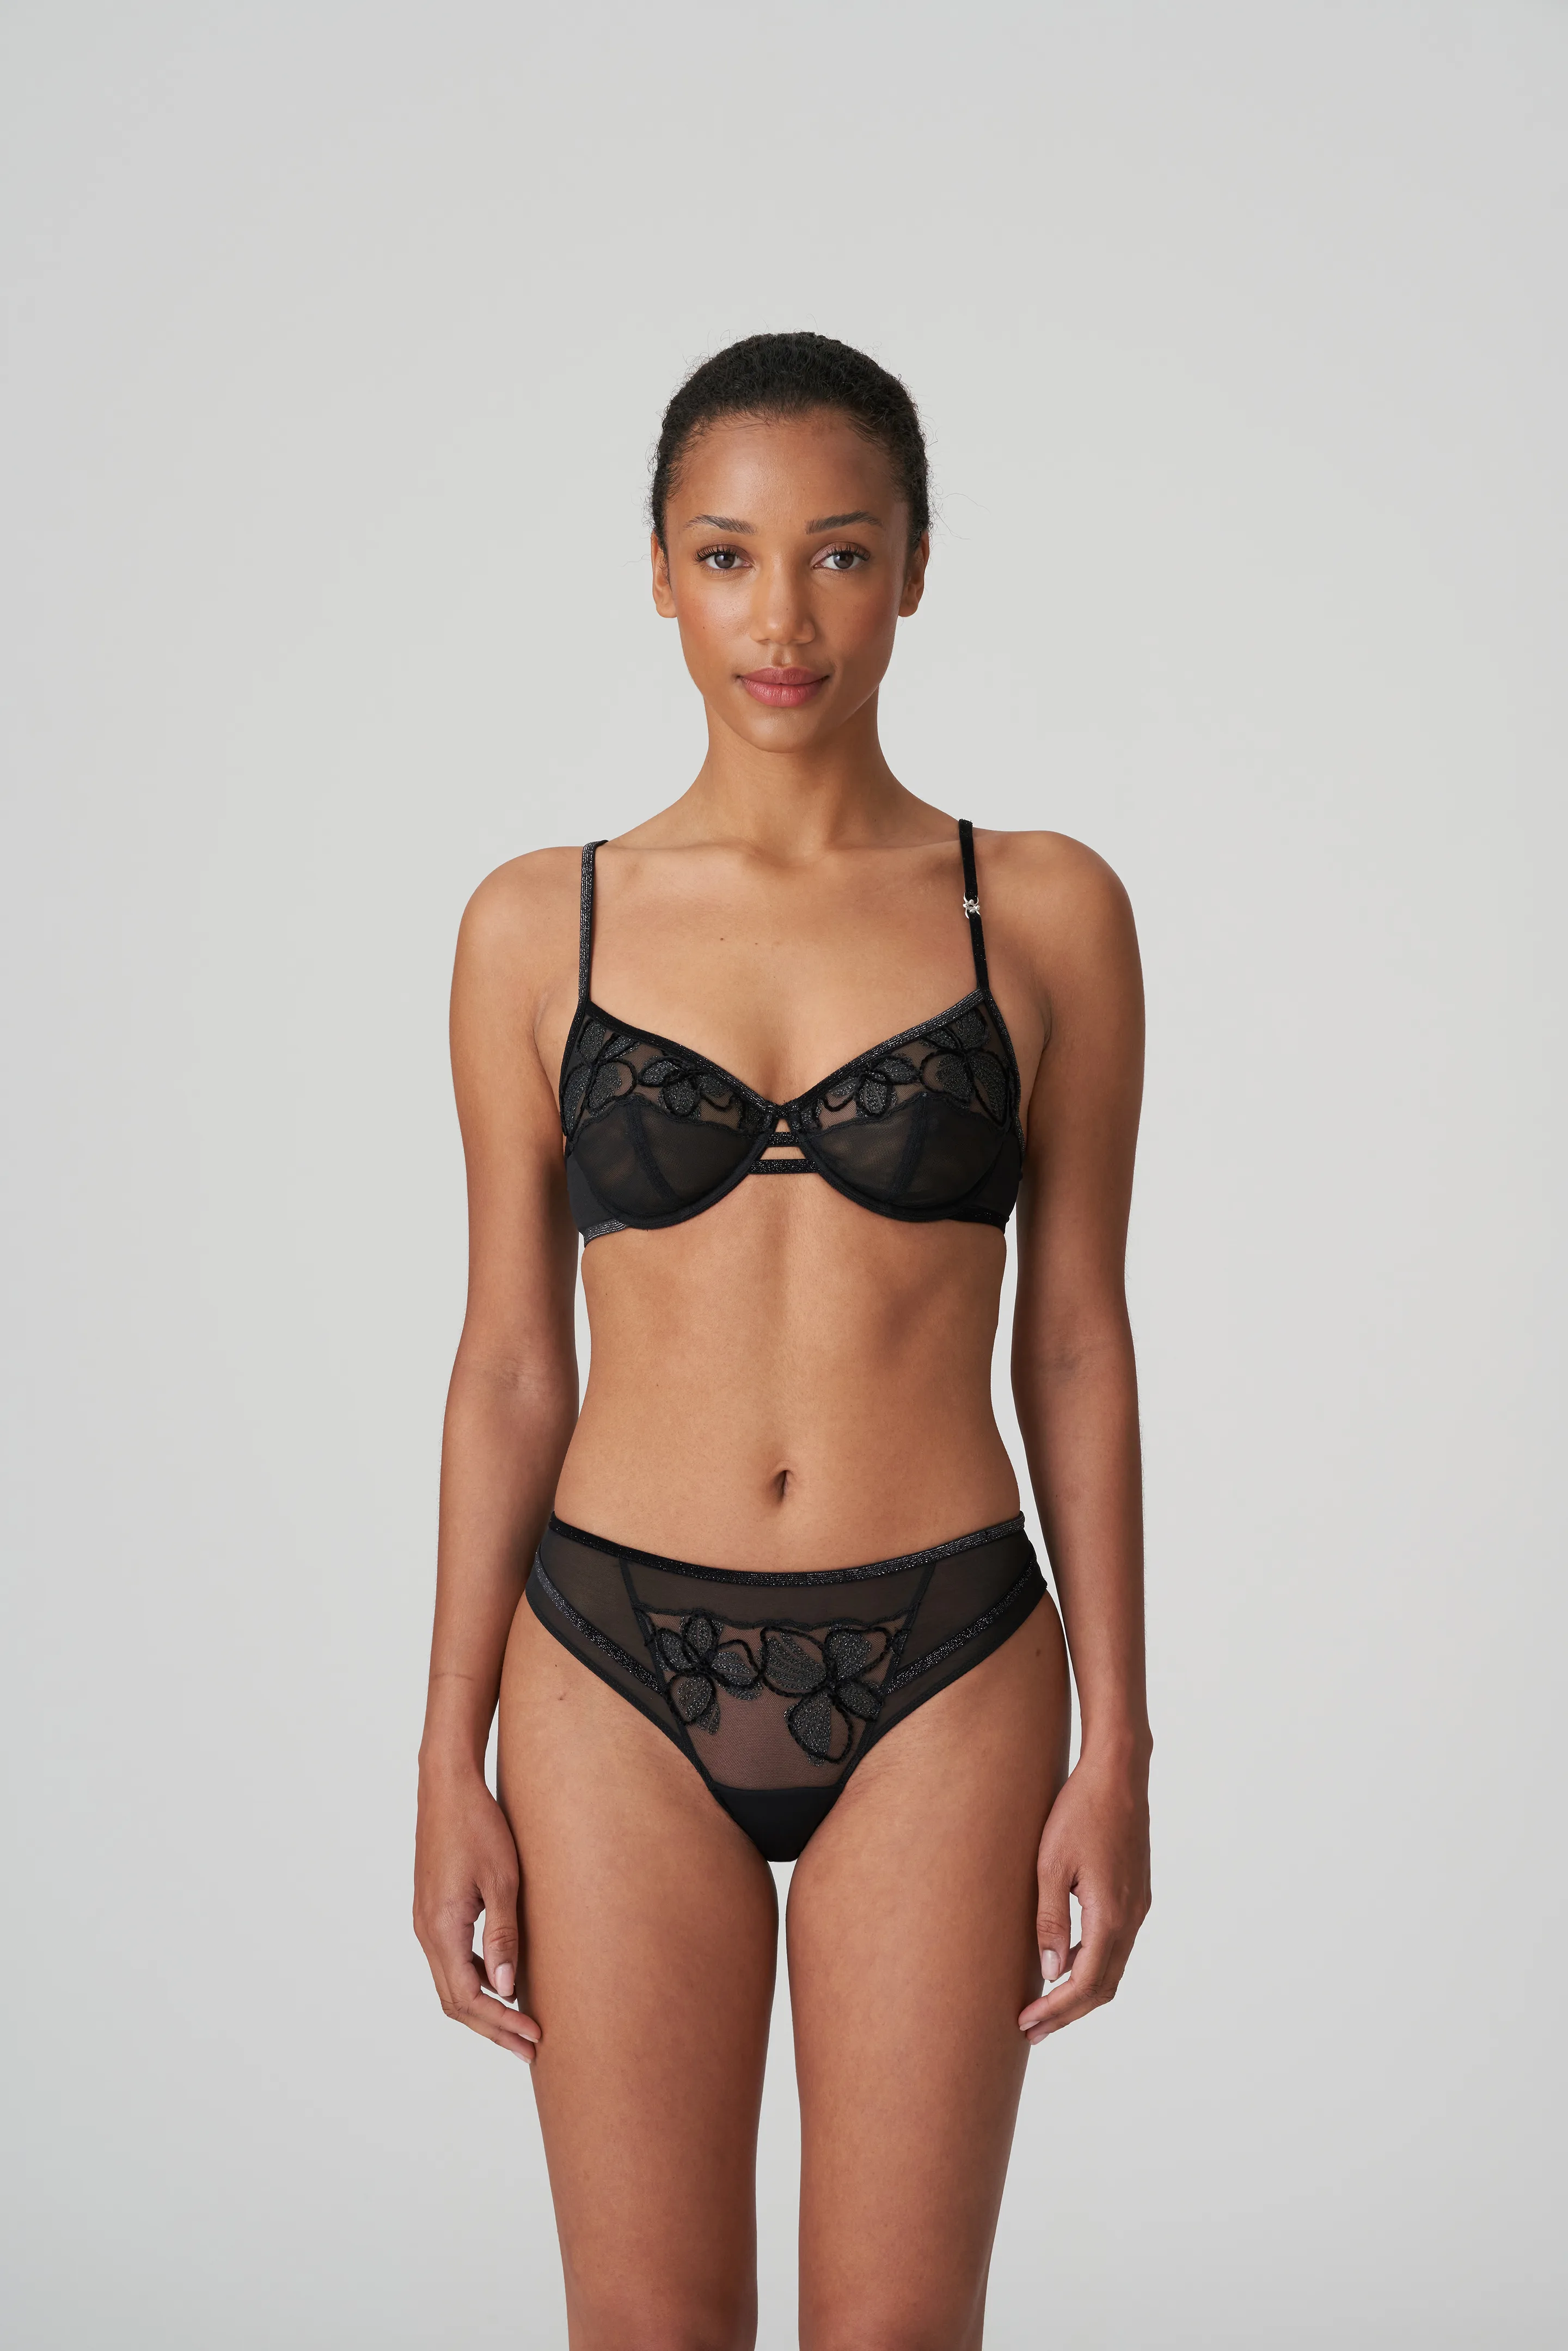 Triumph Sexy Lingerie Set Bra And Underwear Set High Quality Material, Shop Today. Get it Tomorrow!